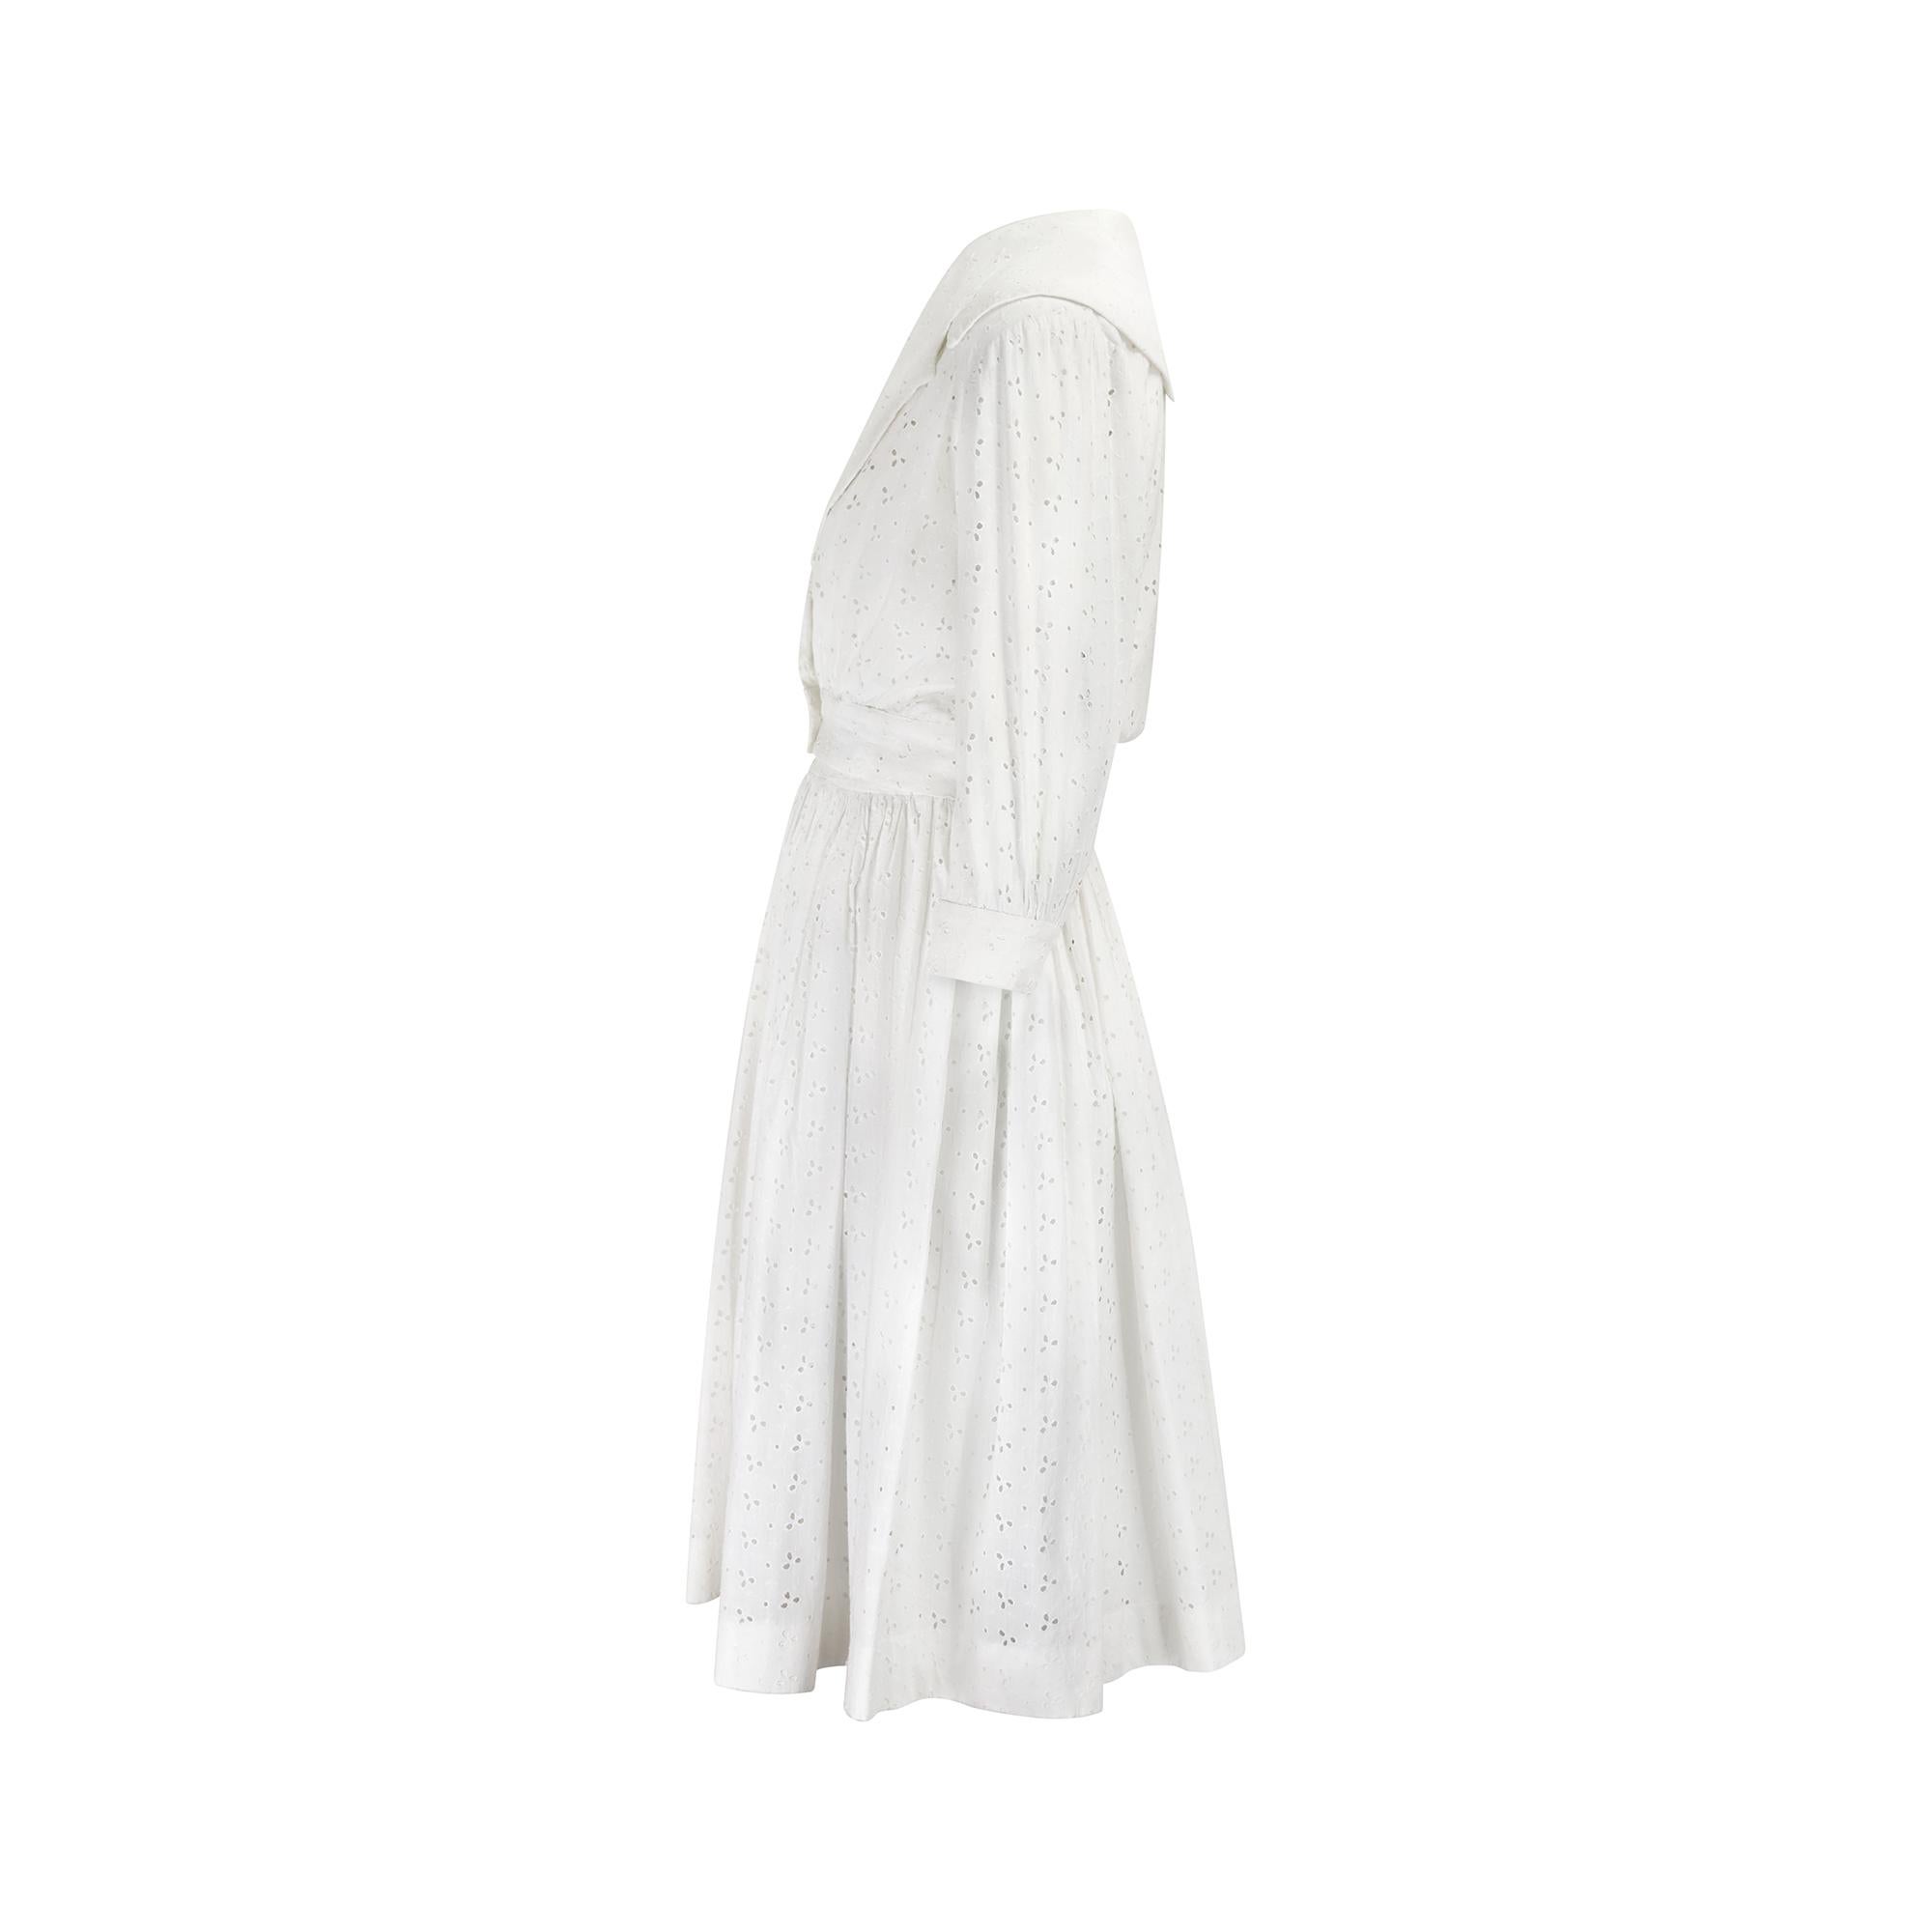 The broderie anglaise dress has been a classic of British summertime fashion since the Victorian era. Characterised by embroidered details and peekaboo eyelets on crisp cotton cloth, at close inspection it often depicted intricate botanical motifs.